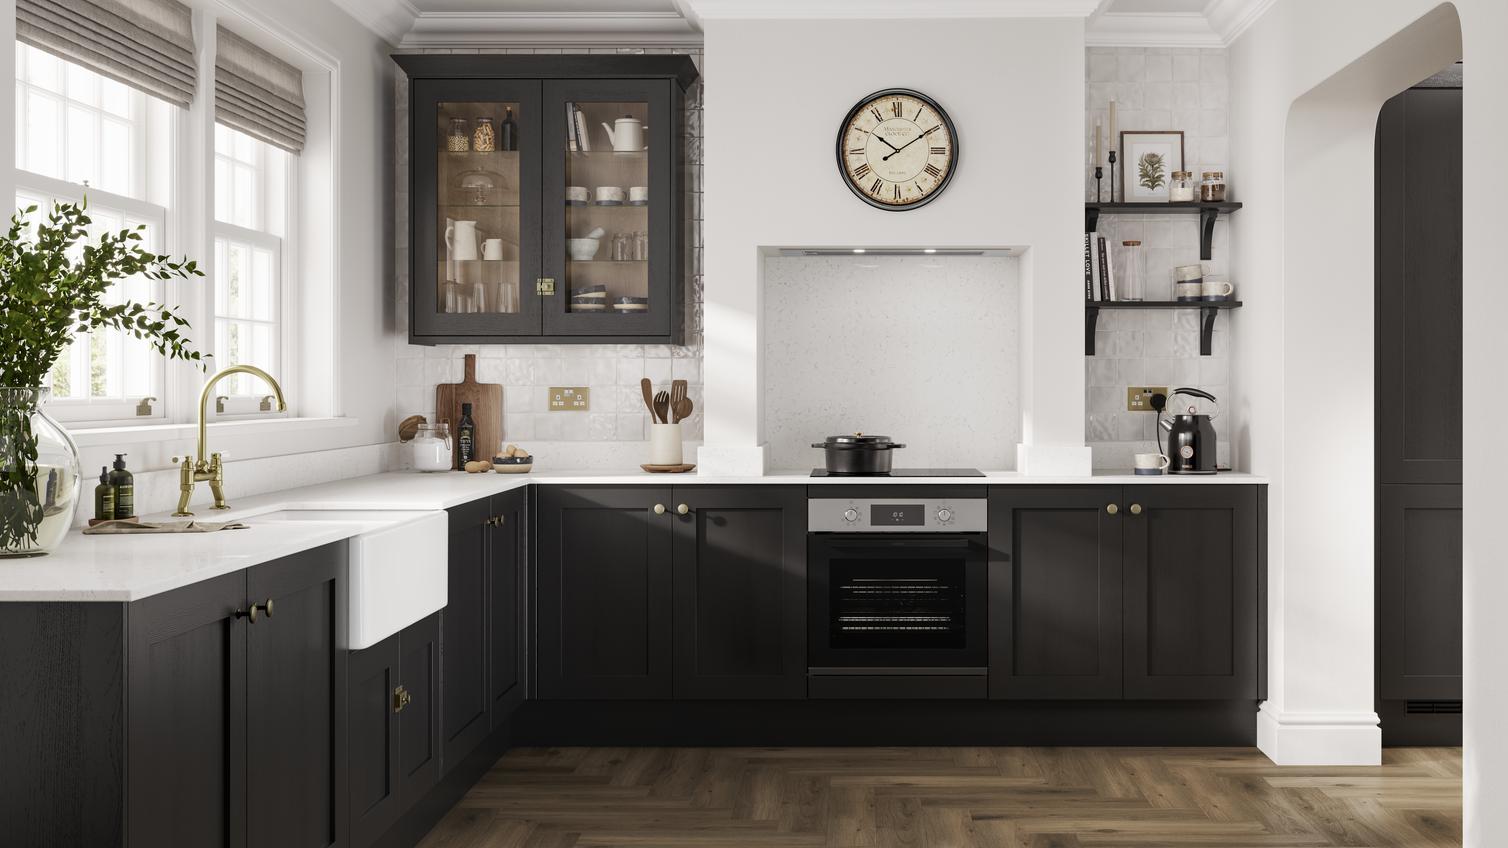 A black shaker kitchen in an L-shaped layout. There are white worktops, chevron oak laminate flooring and a Belfast sink.